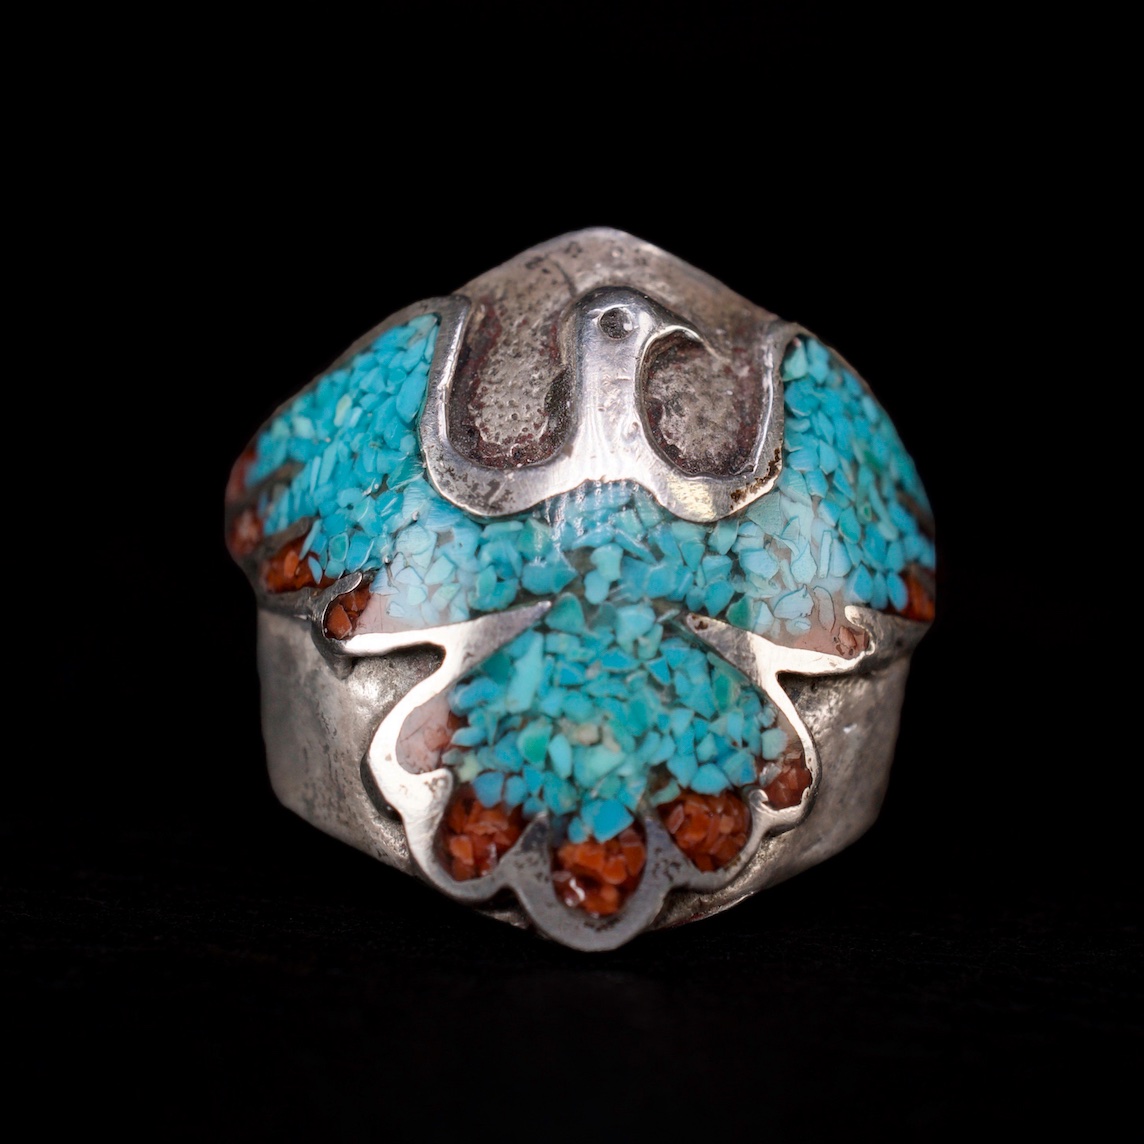 Vintage Native American Navajo Peyote Bird Sterling Silver Turquoise Ring farriderwest.etsy.com/listing/131201… Available at Far-Rider-West.com 
#turquoisering #nativeamerican #indianjewelry #peyote #western #Navajojewelry #turquoisejewelry #mensring #peyotebird